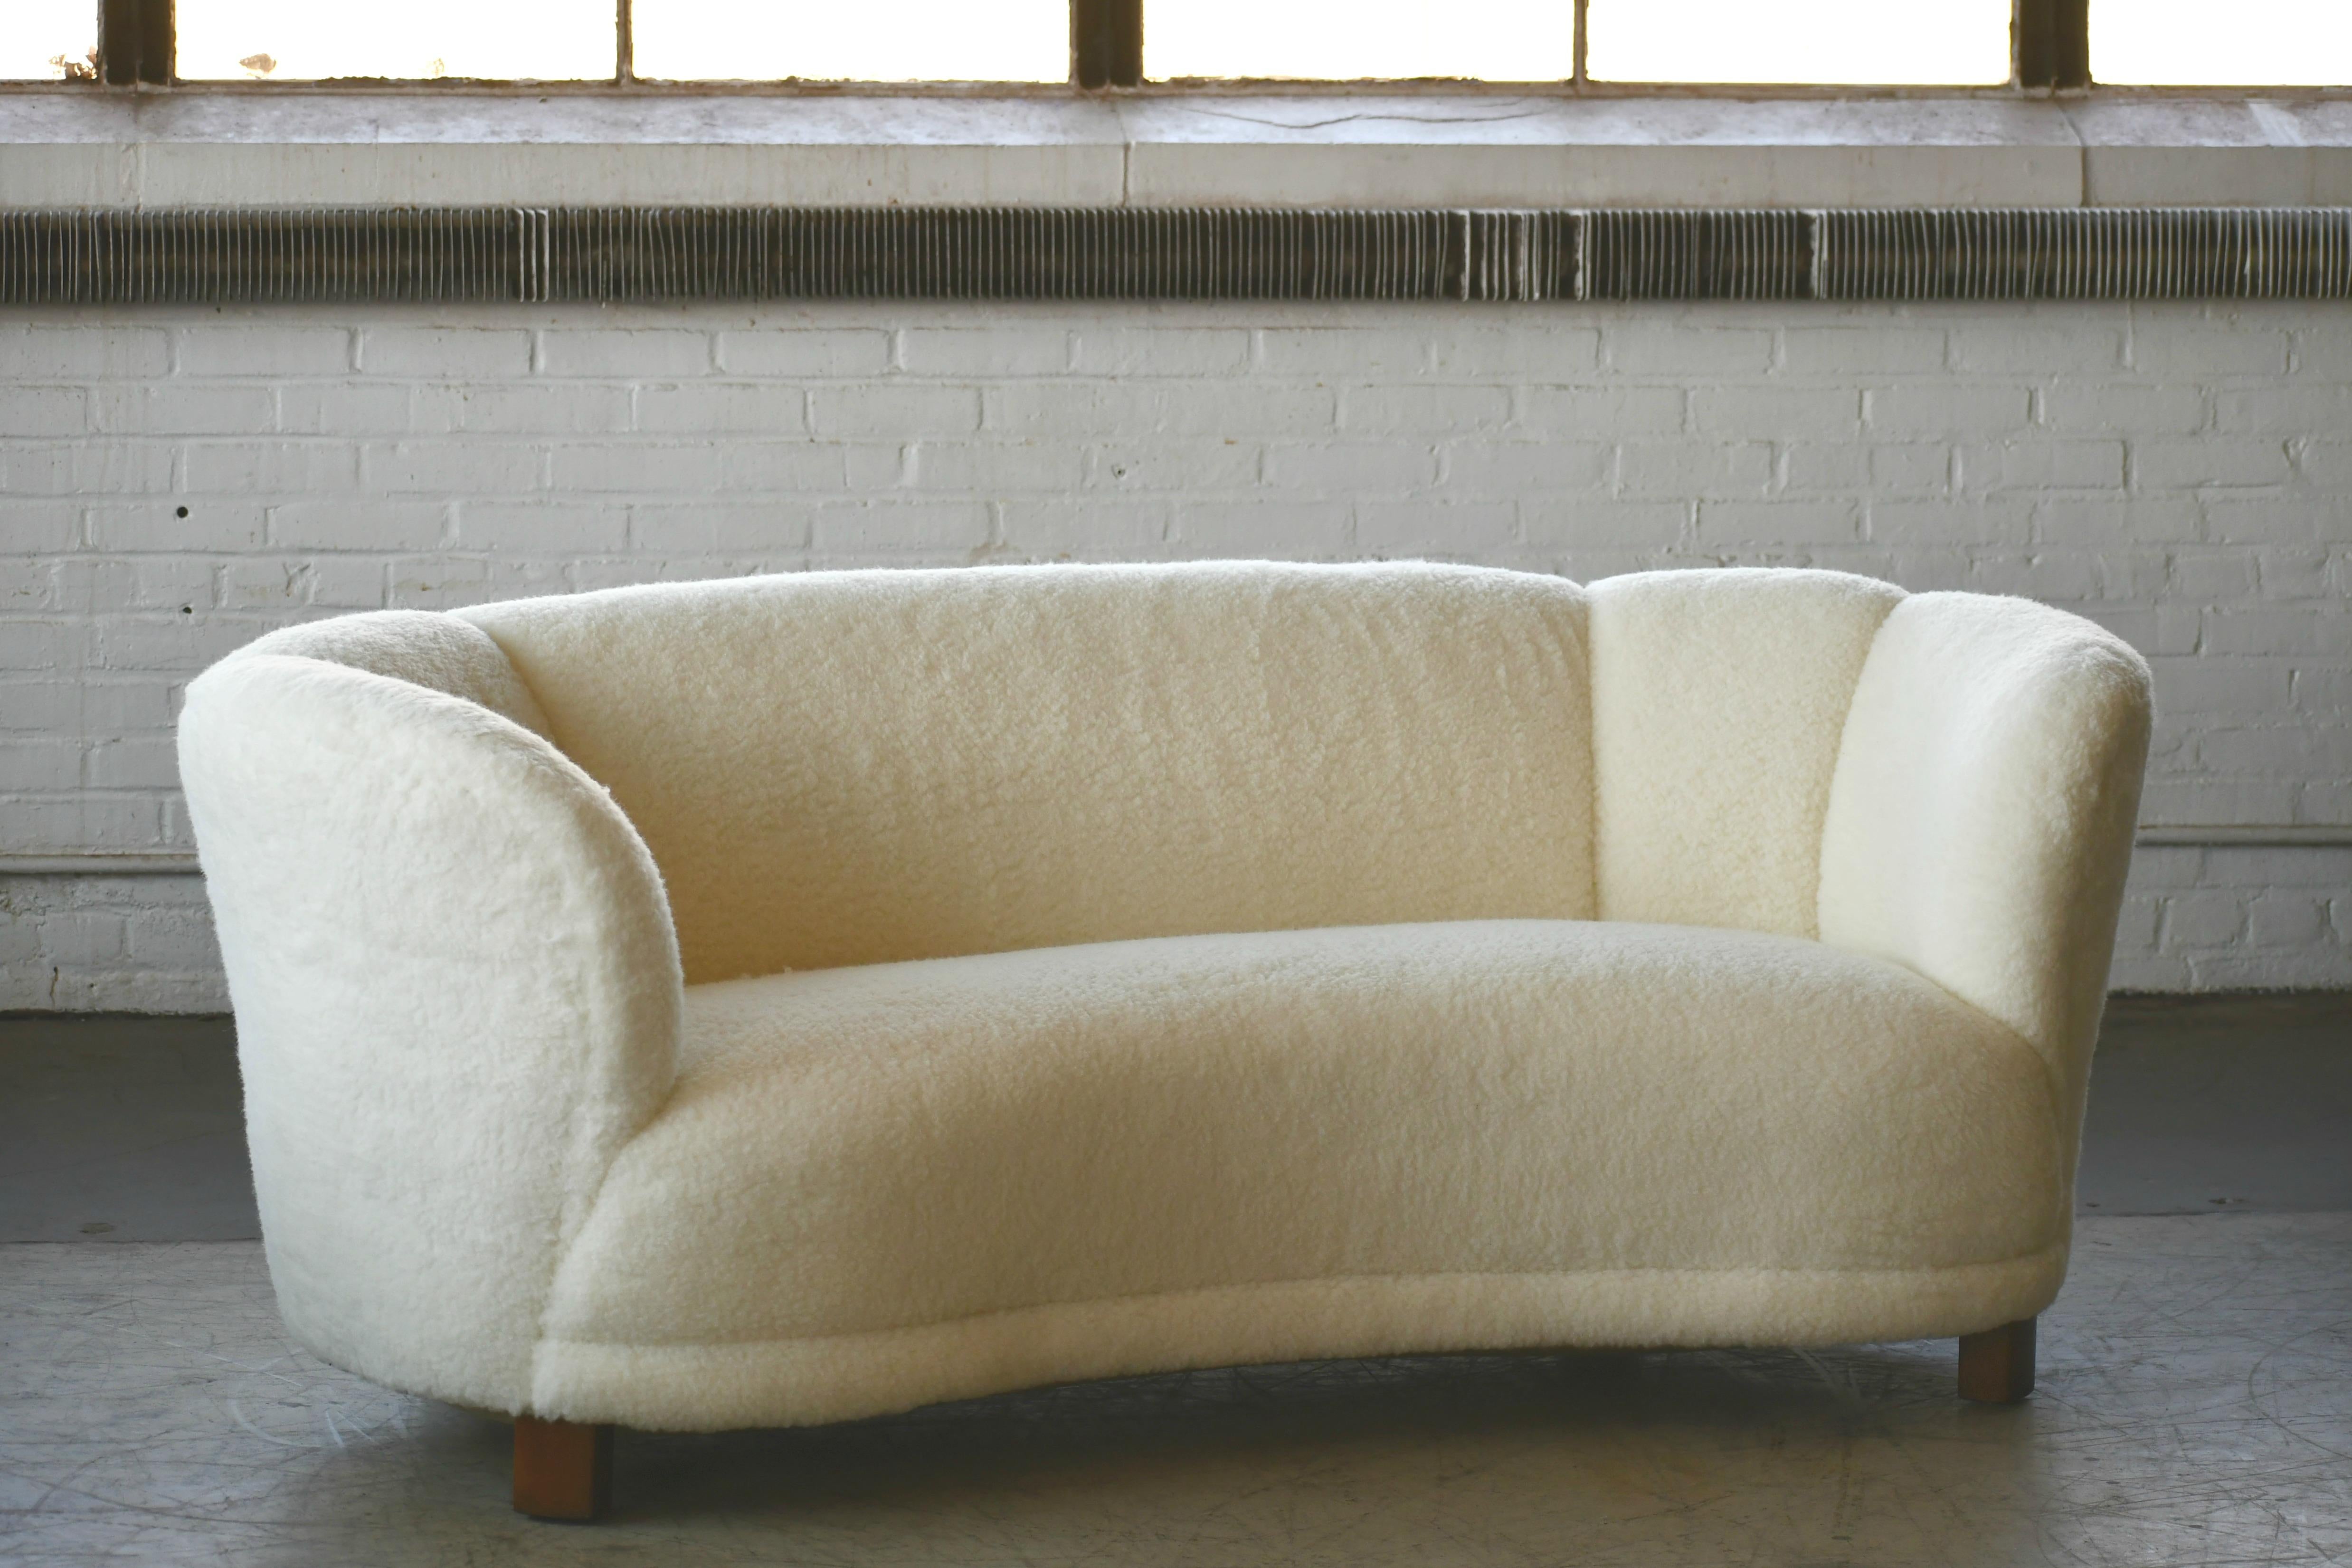 Viggo Boesen style banana shaped or curved sofa reupholstered in new lambswool made in Denmark in the 1940s. This sofa will make strong statement in any room. Beautiful round voluptuous lines and with large block legs. Fully refurbished and newly